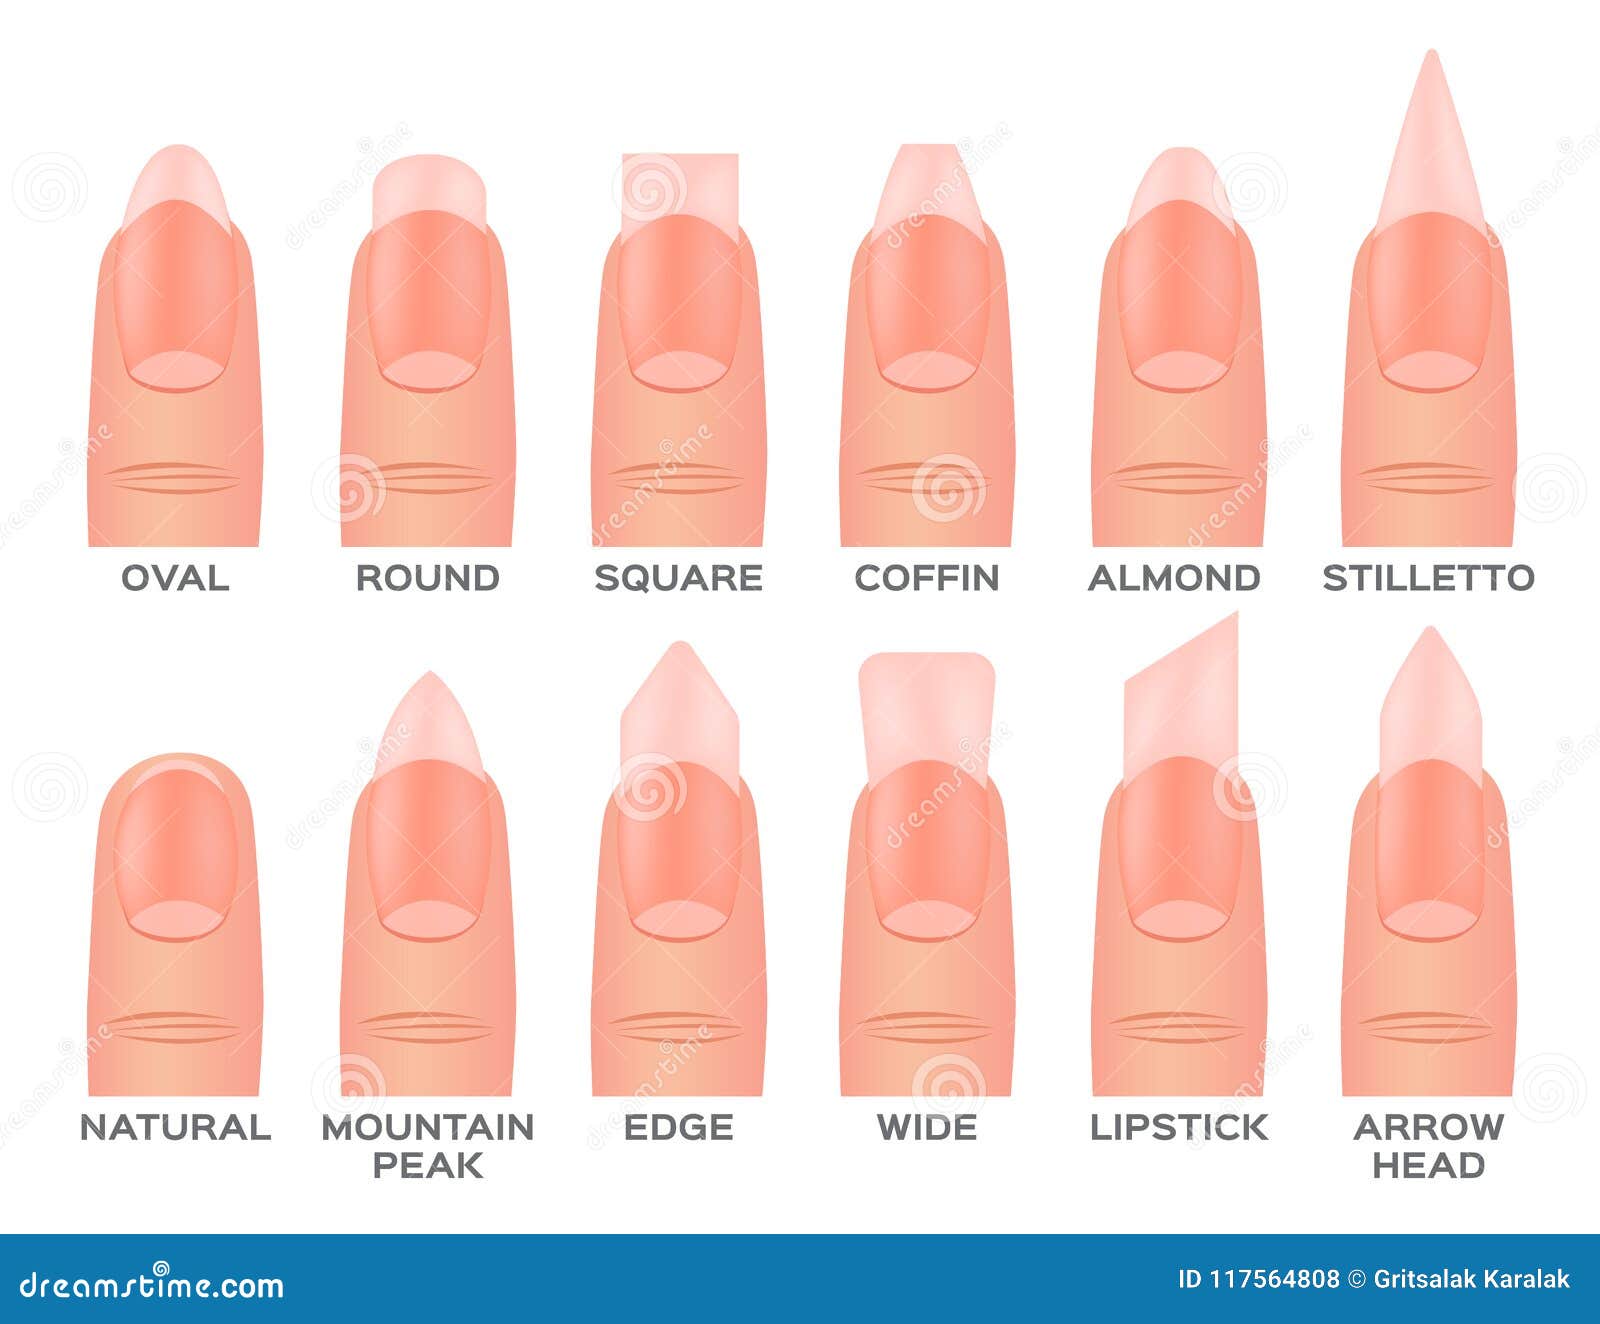 Best 14 Nail Shapes For Girls In 2019 — And Tips for Nail Care | by Pooja  gupta | Medium